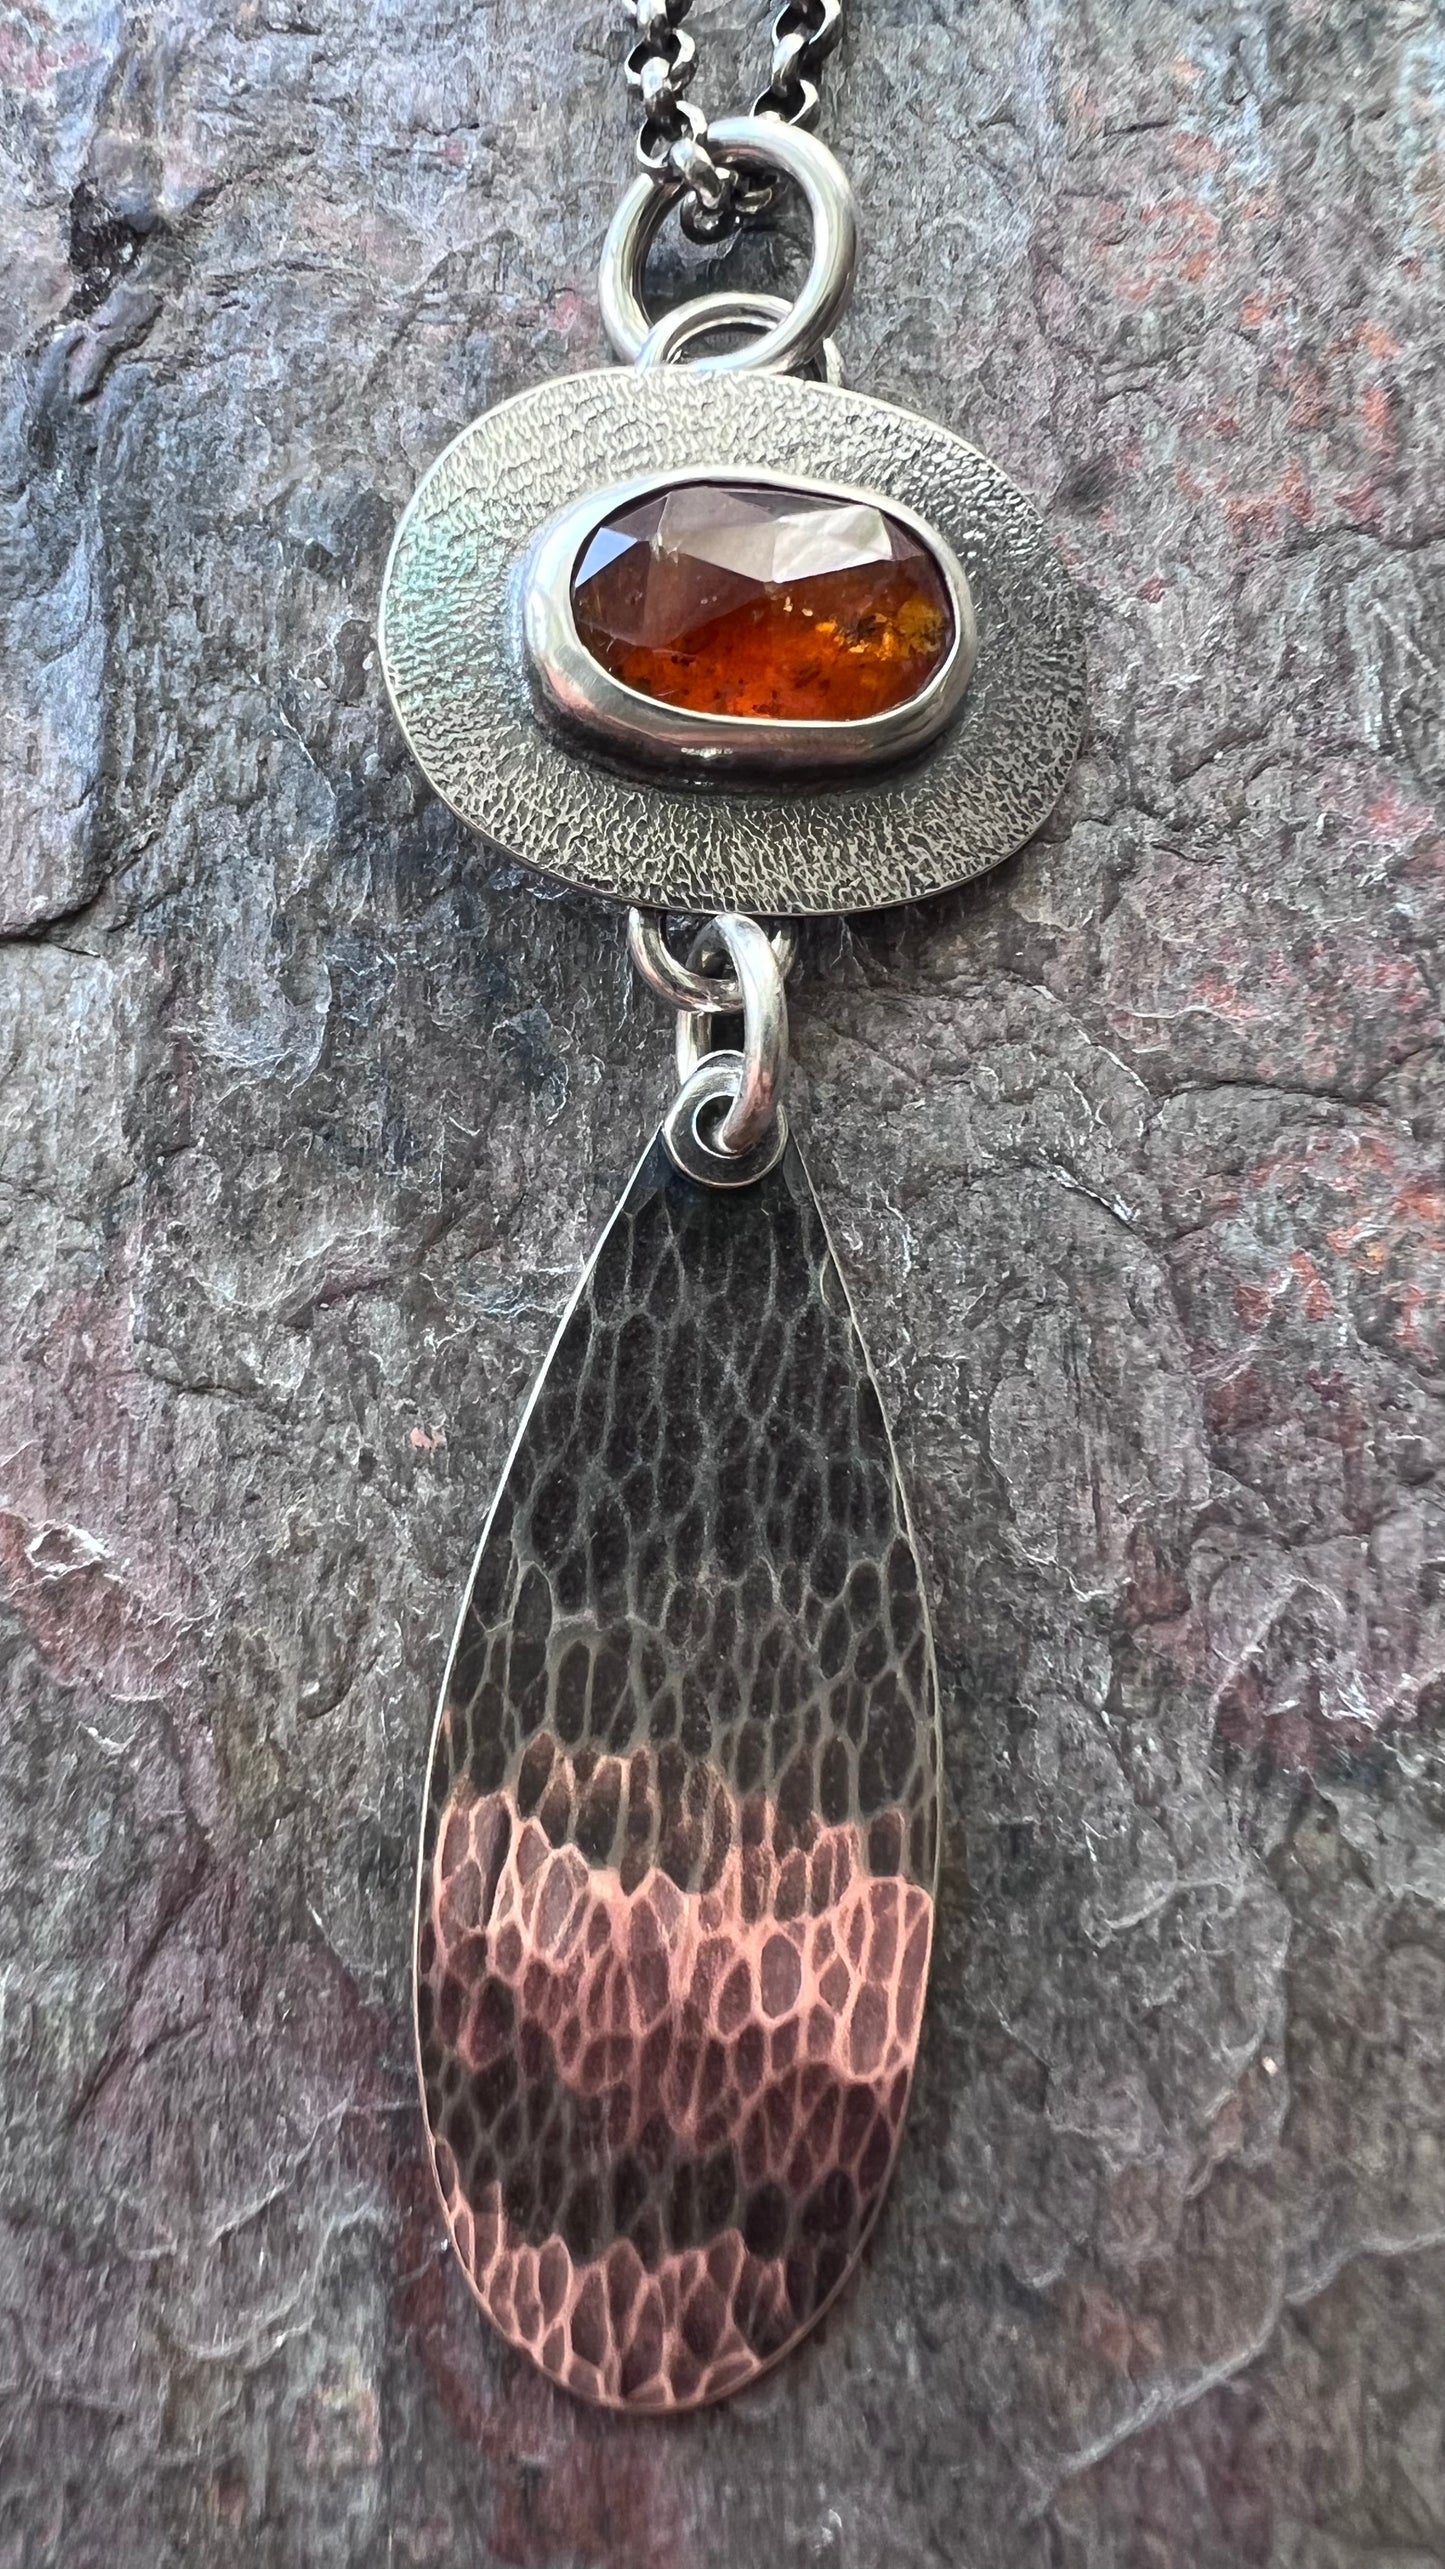 Orange Kyanite Sterling Silver Necklace - Handmade One-of-a-kind Pendant on Sterling Silver Chain